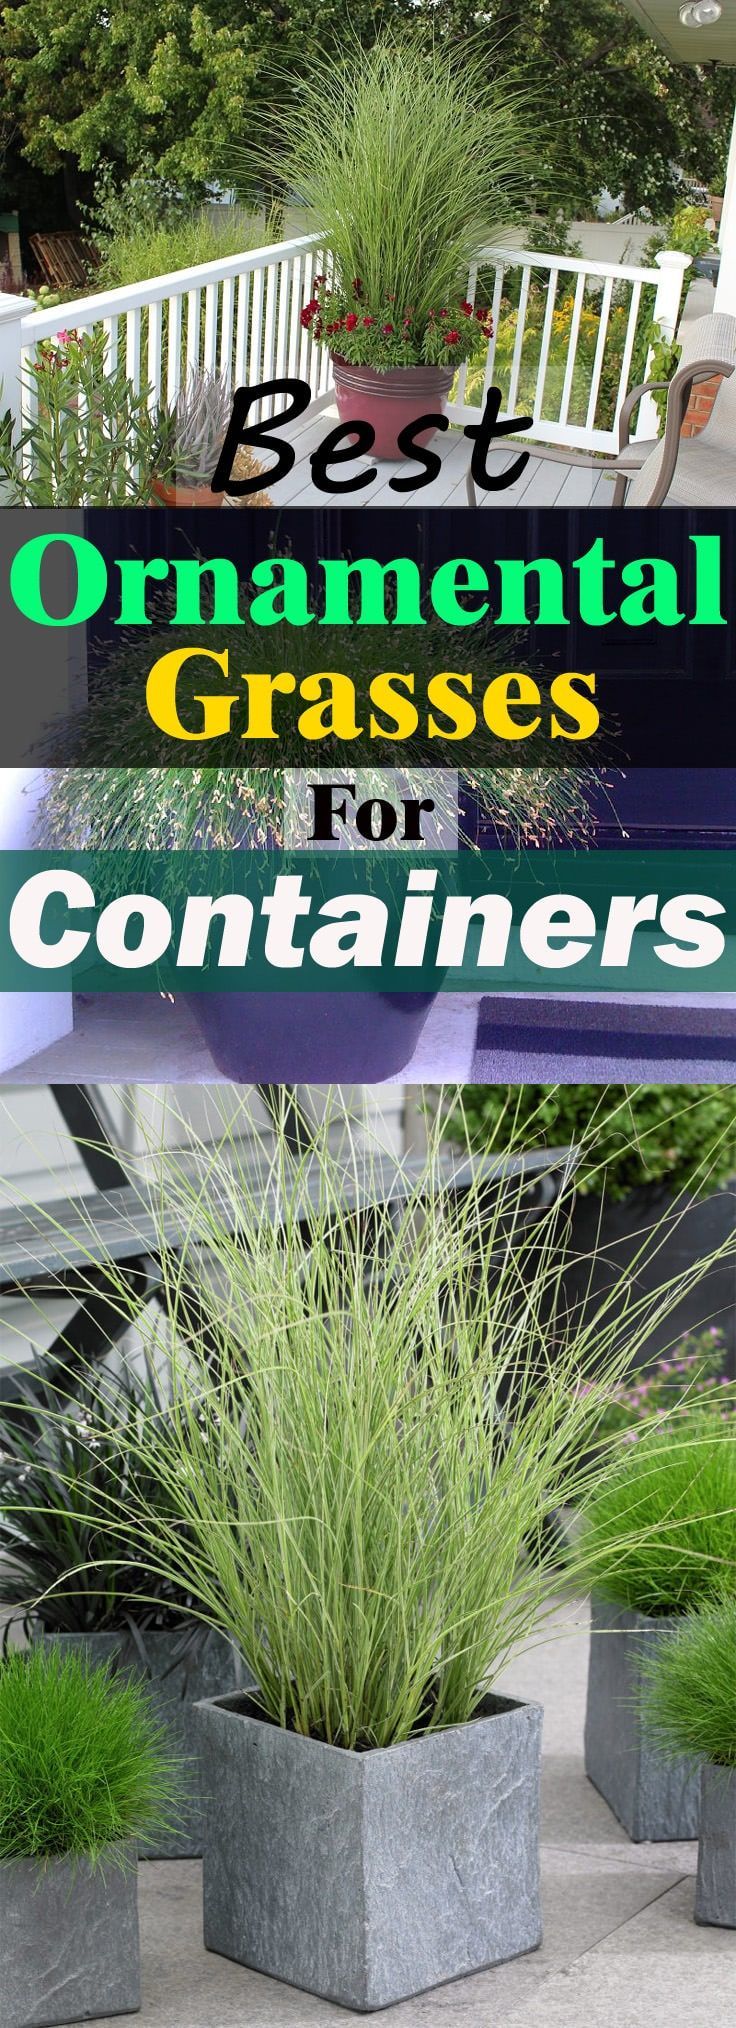 Best Ornamental Grasses for Containers and How to Grow them -   18 plants Outdoor grasses ideas